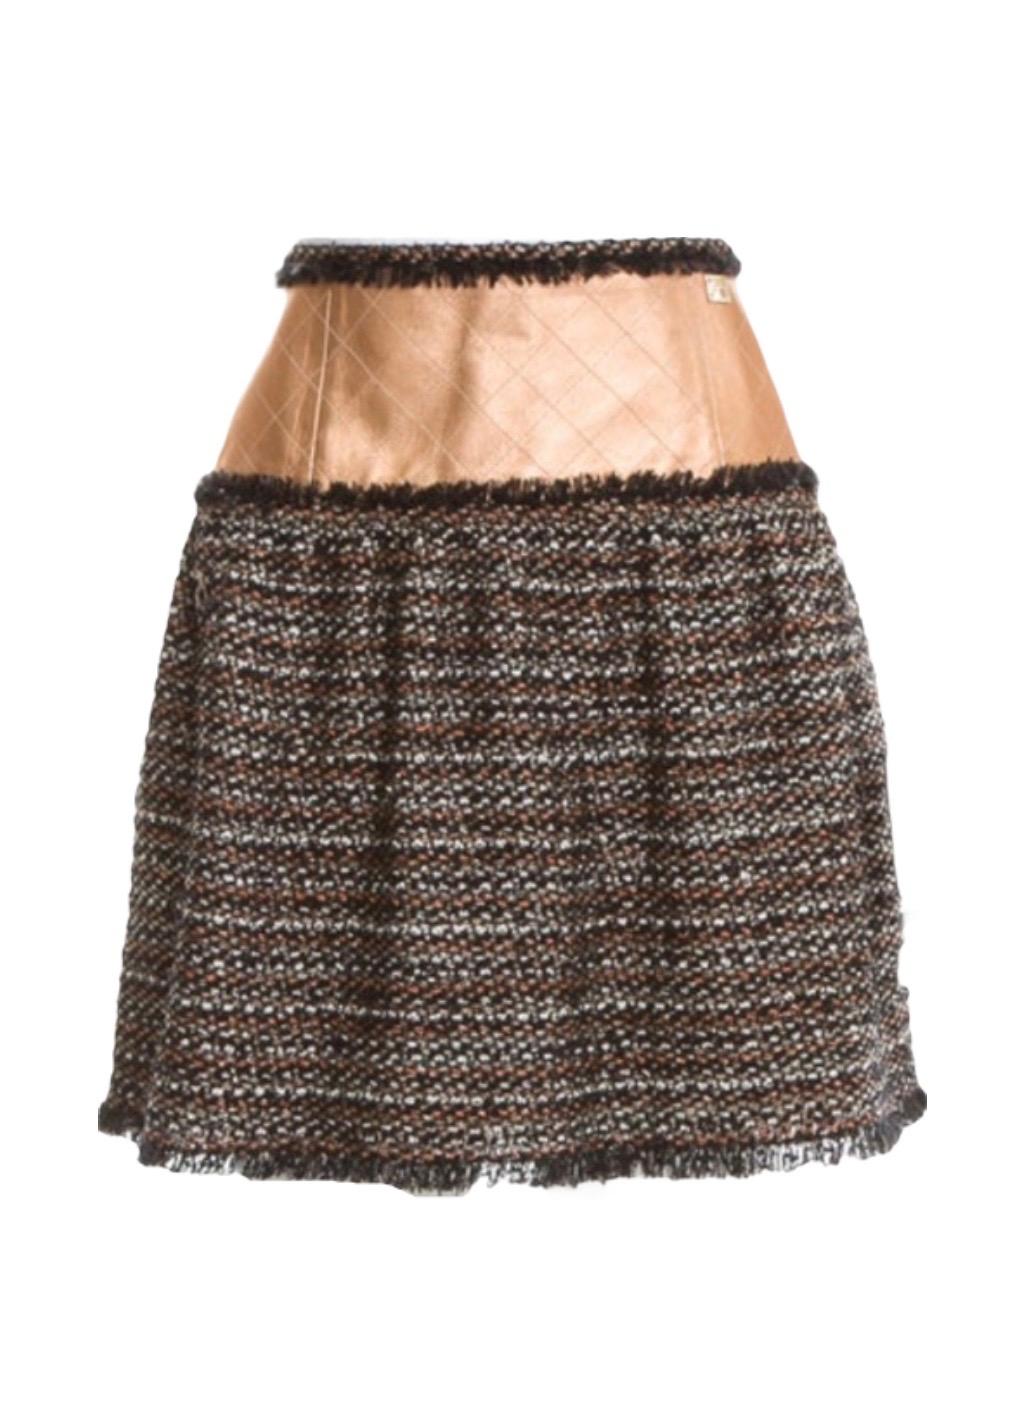 An stunning CHANEL tweed skirt
A true CHANEL signature item that will last you for many years
A fantastic piece created from finest leather and tweed fabric
Frayed details
Dry Clean Only
Made in France
Estimated etail price 5799$ plus taxes
Size